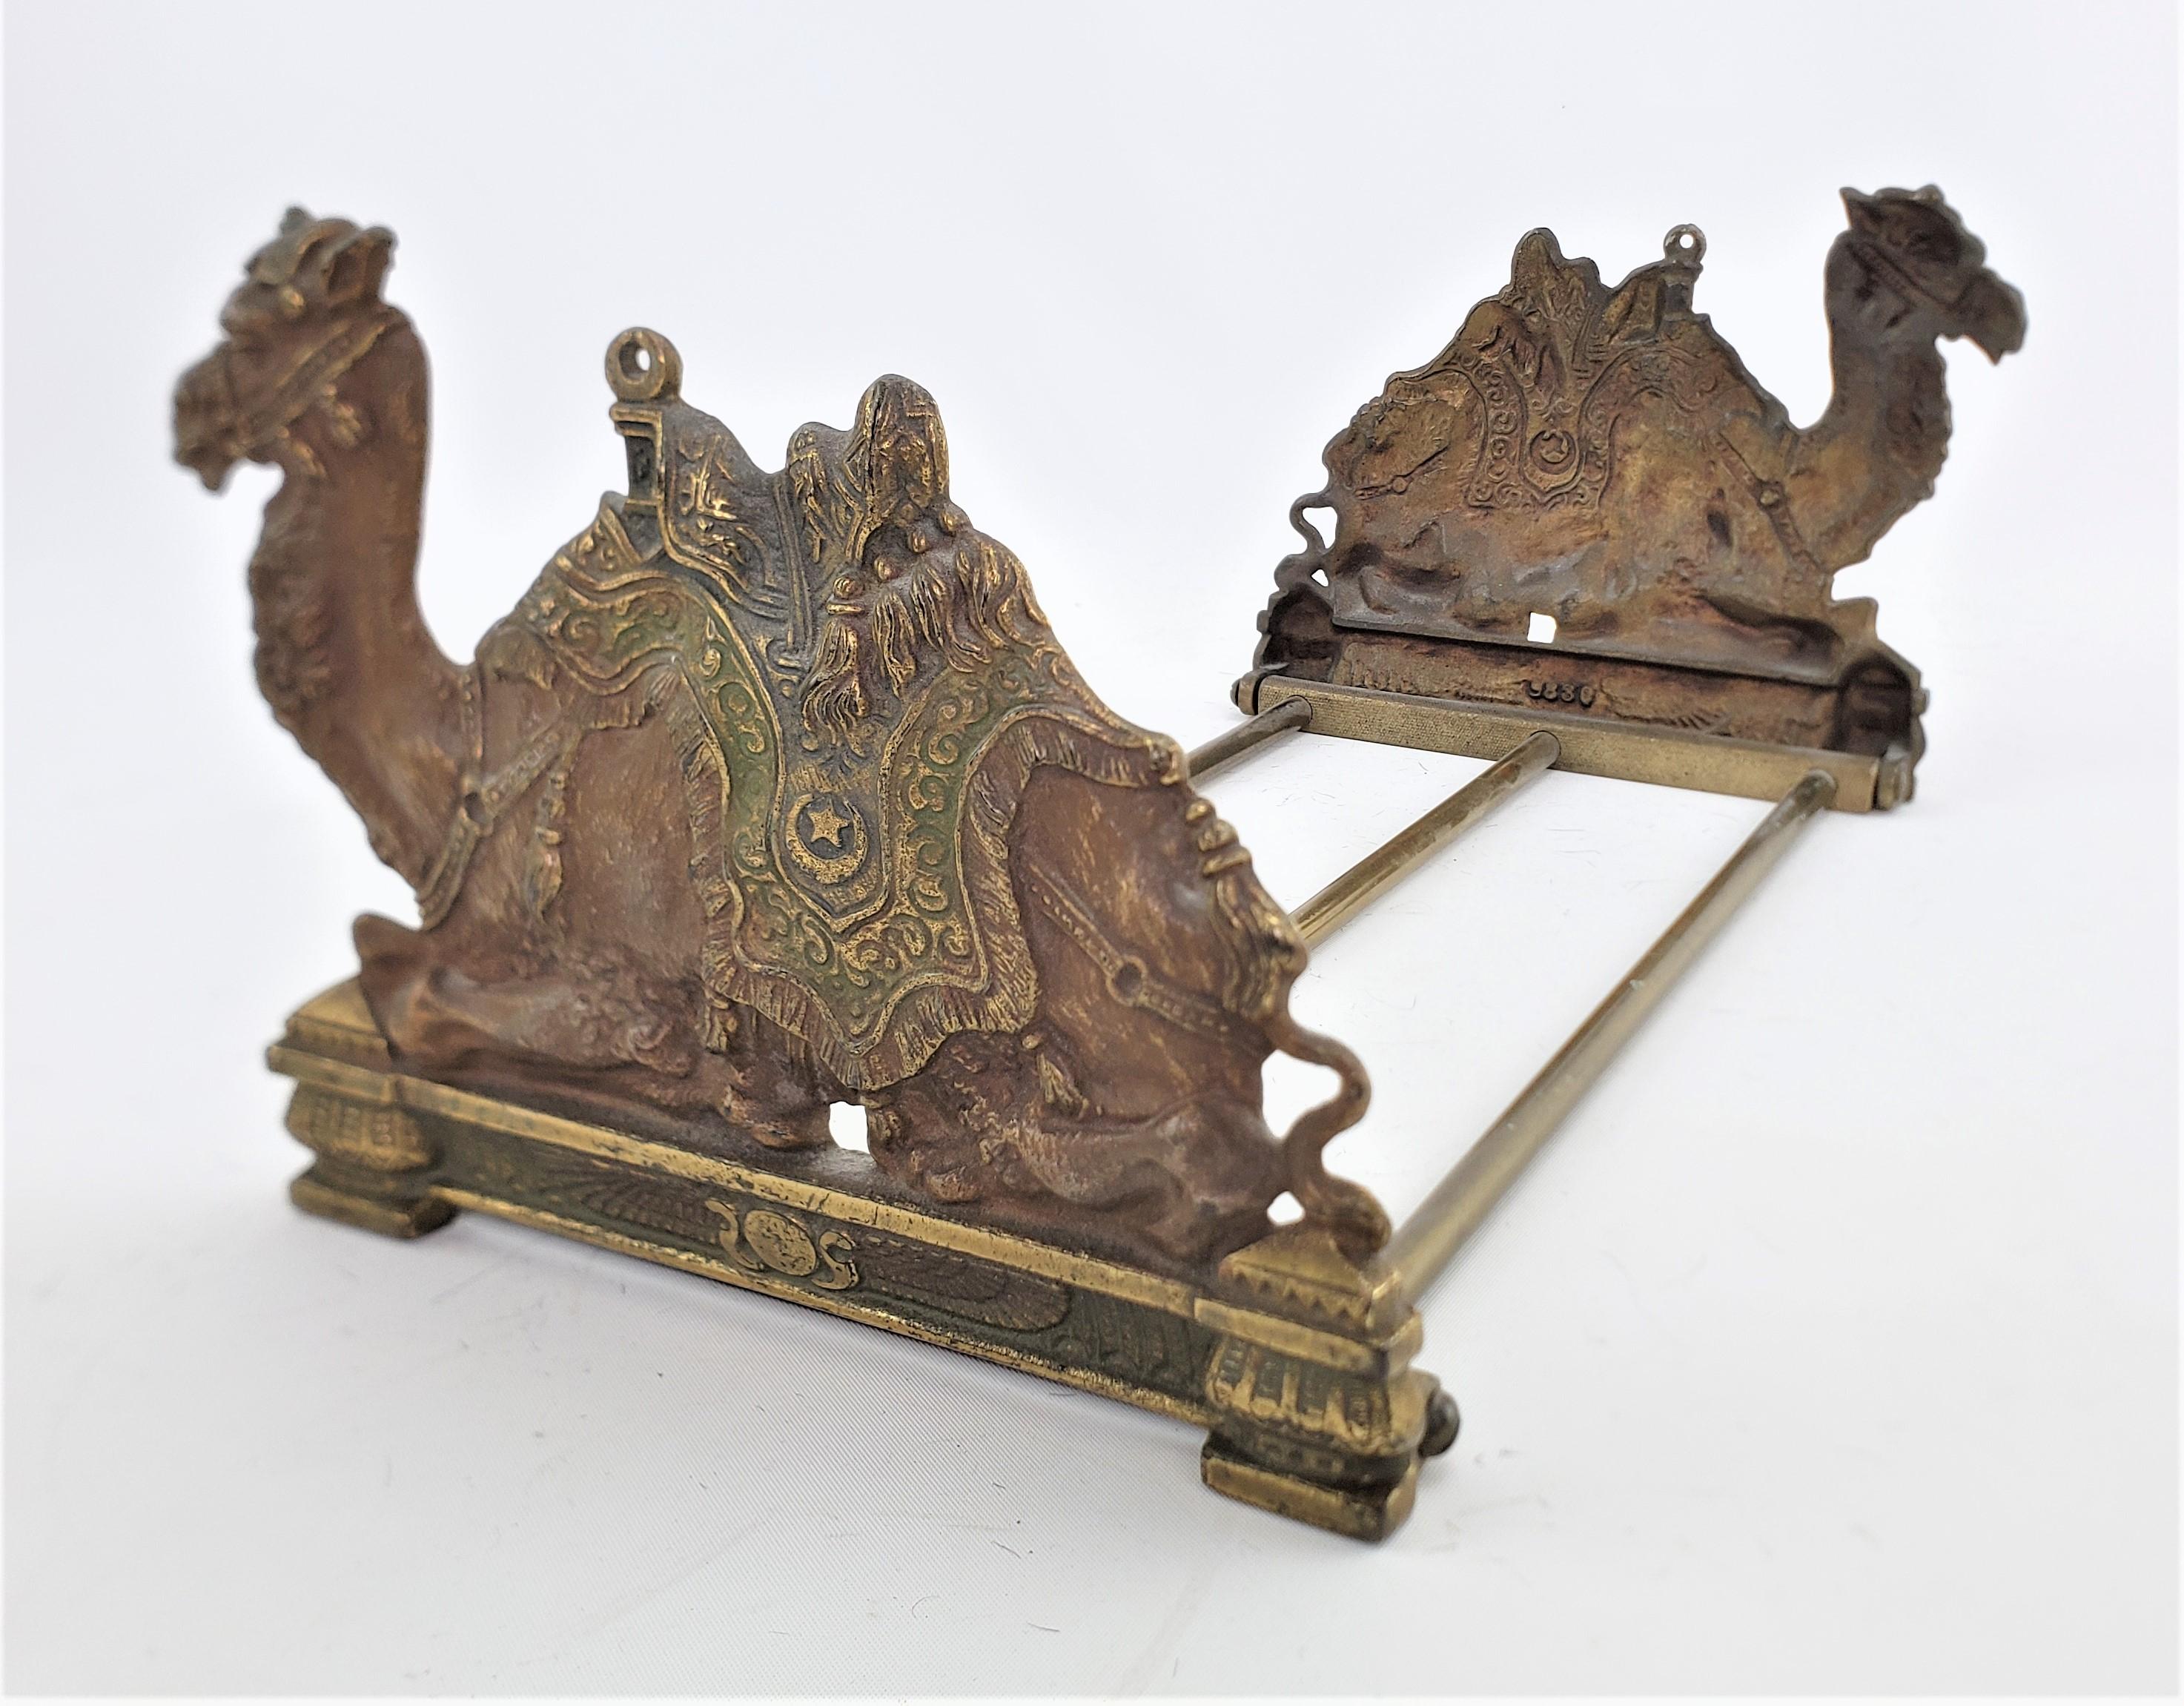 This very well executed cast and cold-painted bronze and brass book stand is unsigned, but presumed to have originated from Austria and dating to approximately 1920 and done in a period Art Deco style. The stand is quite heavy and very sturdy and